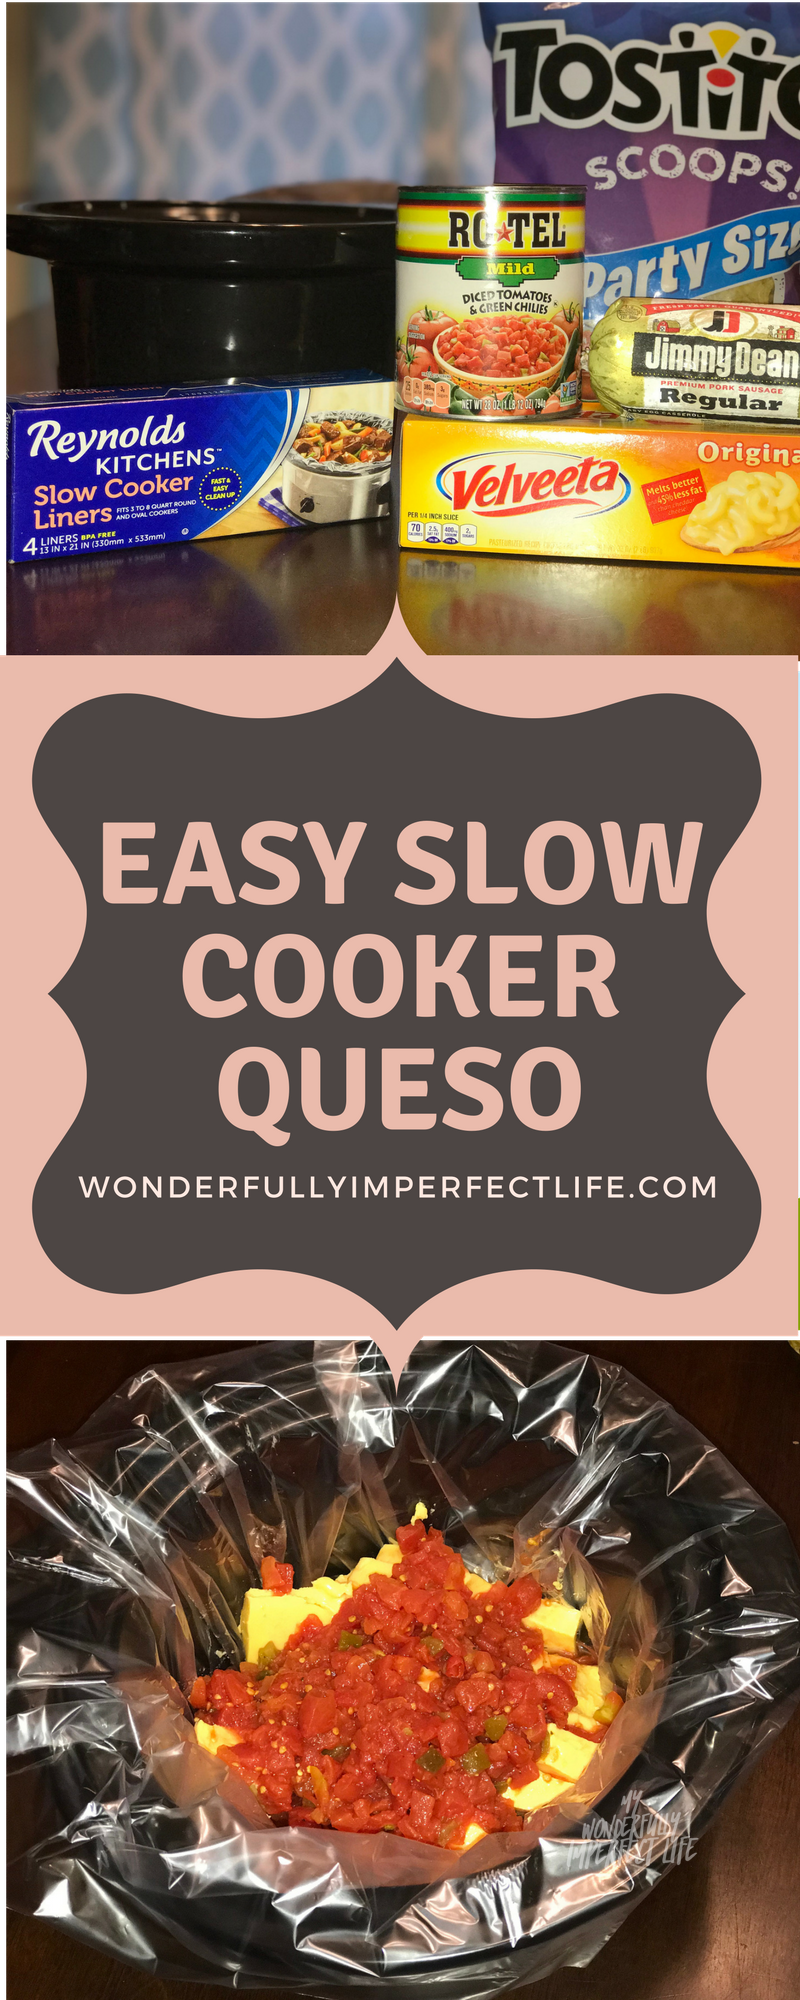 Easy Slow Cooker Queso